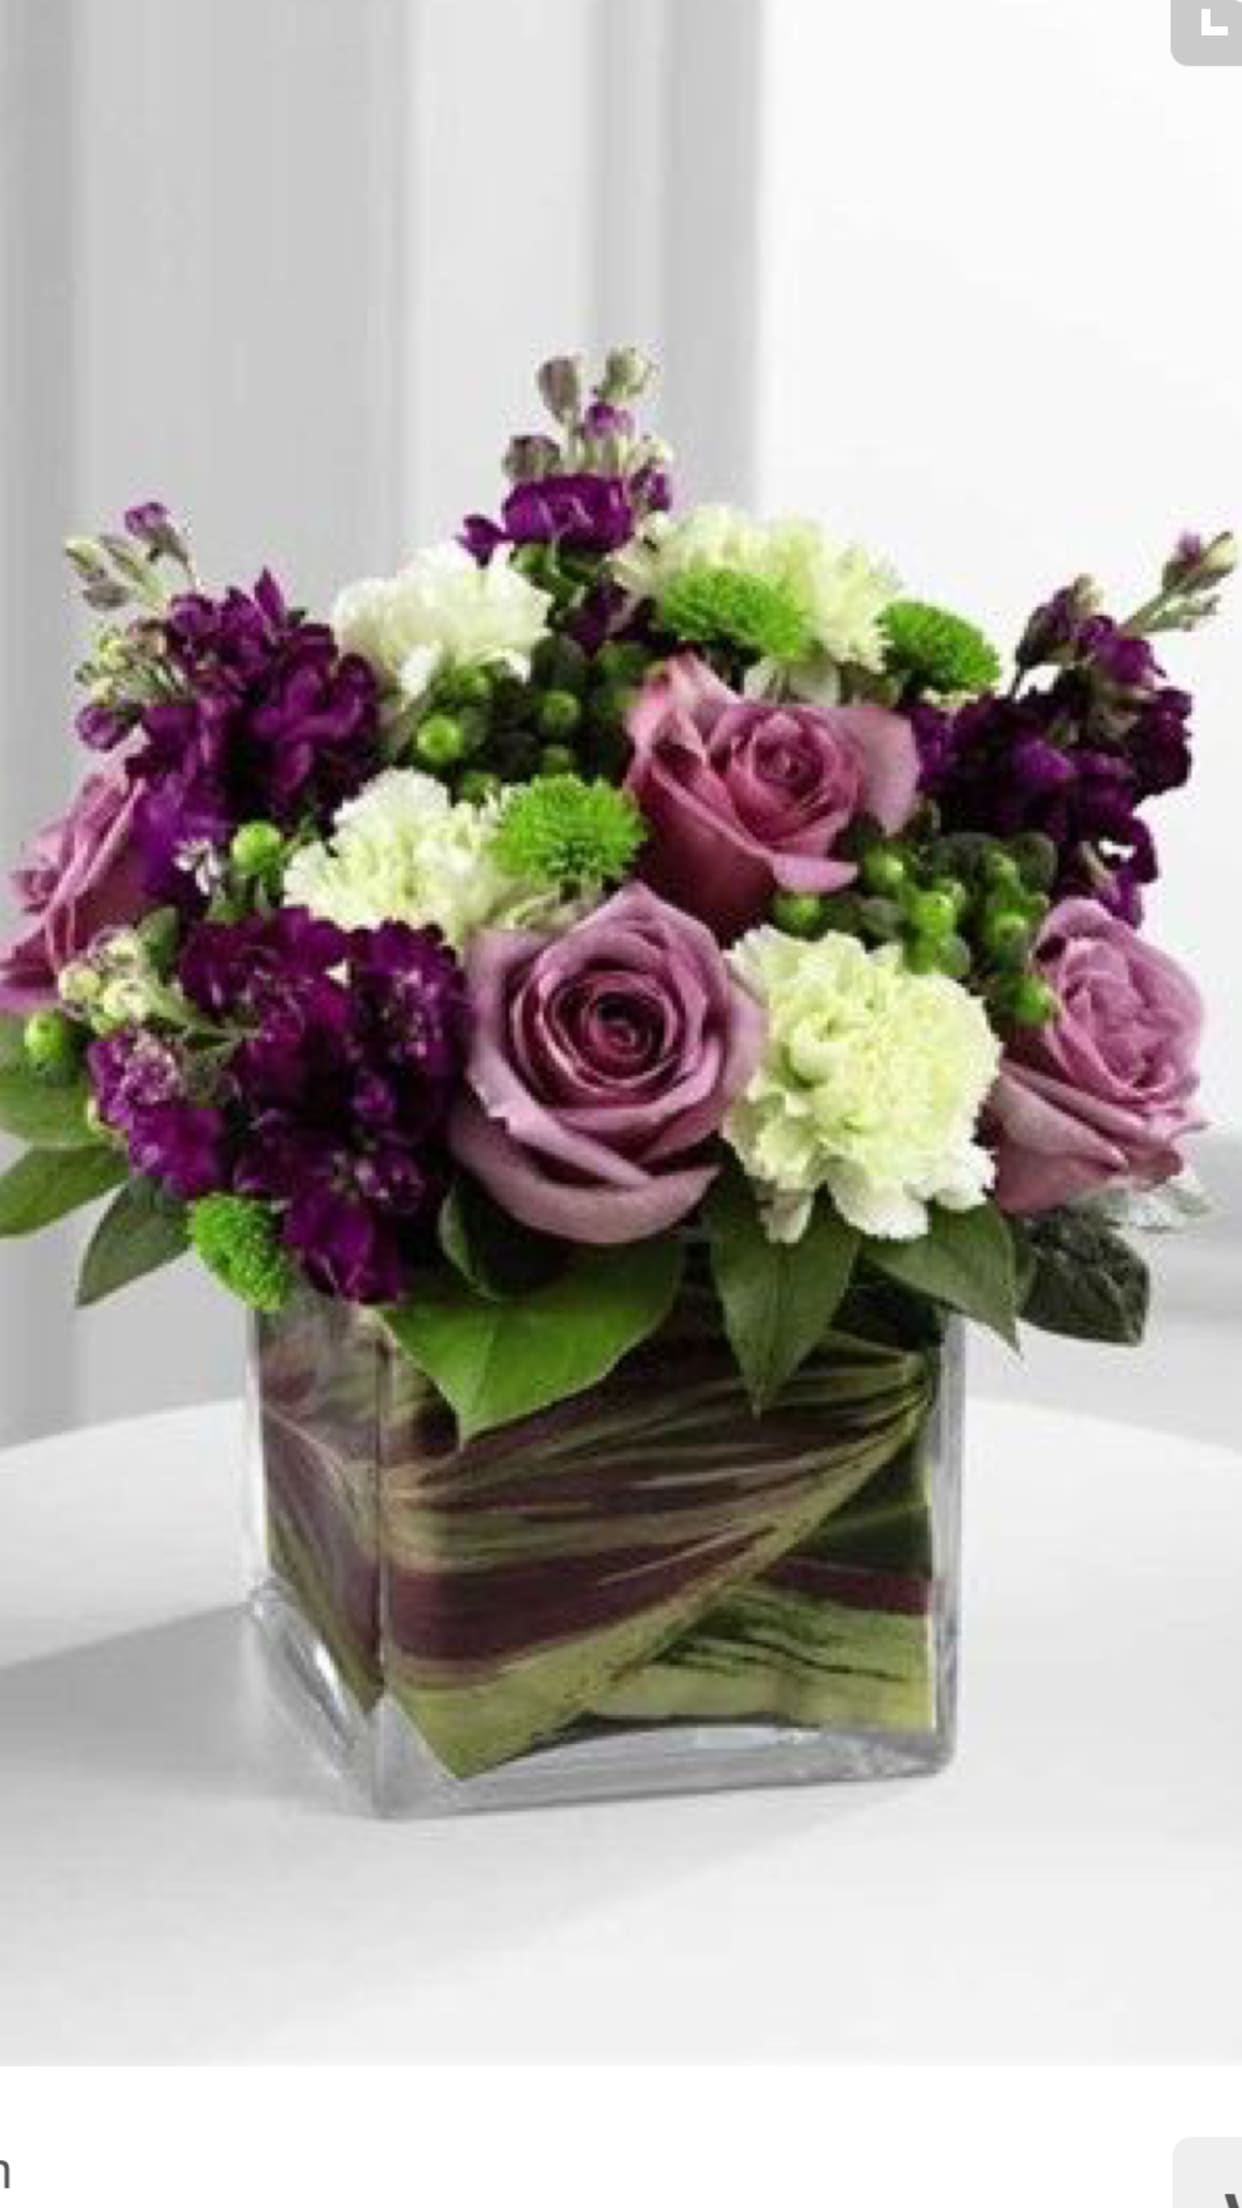 Purple passion  - Roses, stock, lily 